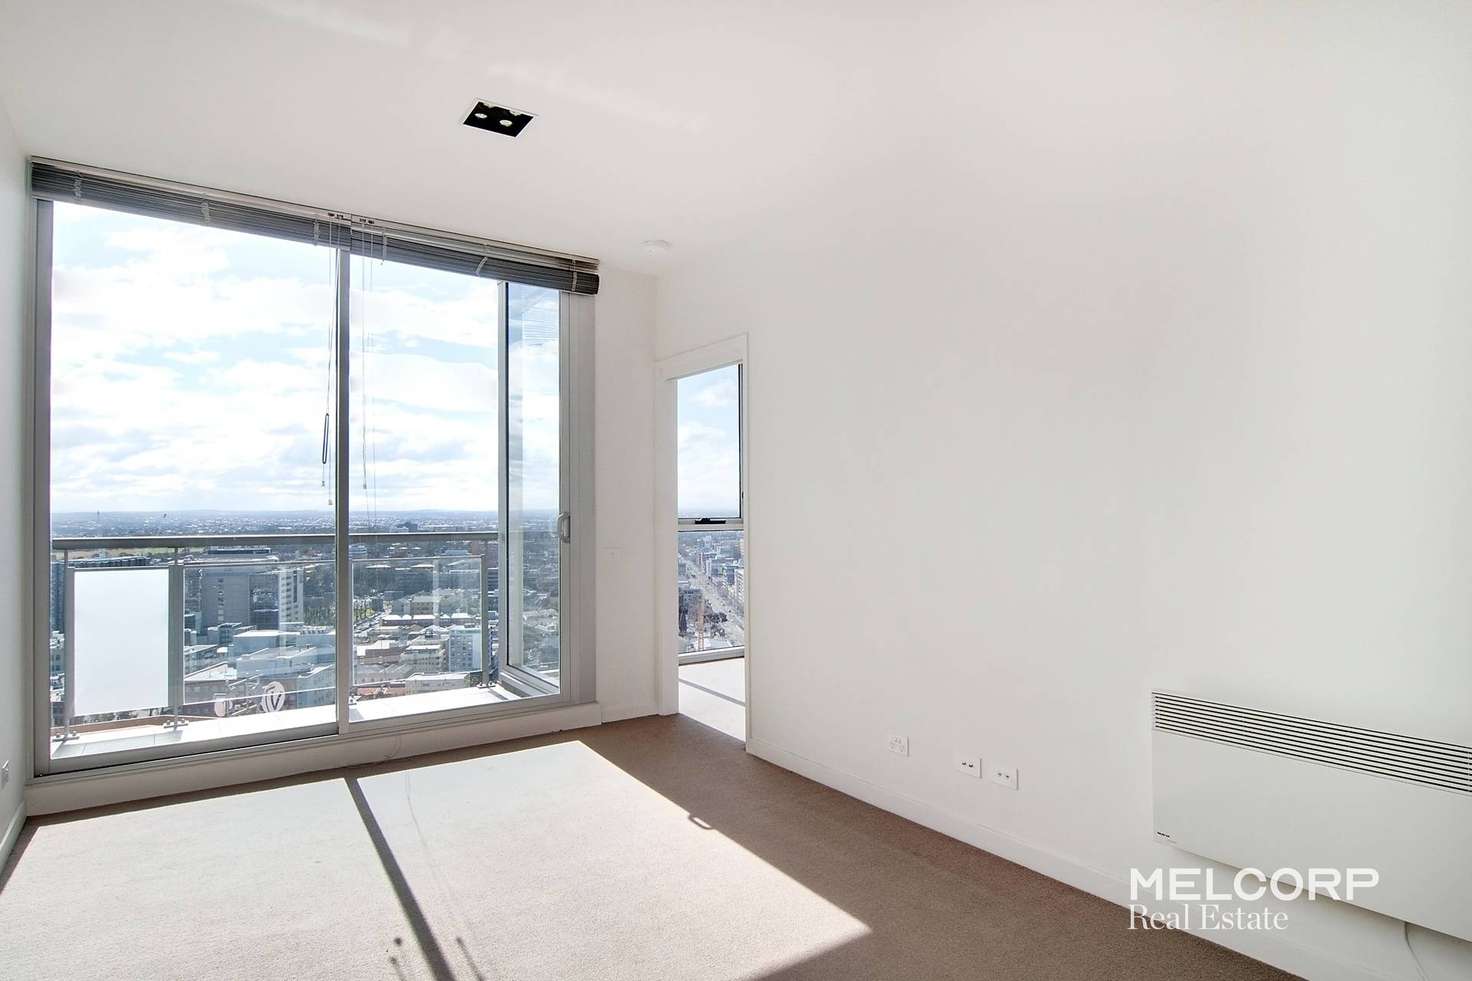 Main view of Homely apartment listing, 3108/8 Franklin Street, Melbourne VIC 3000